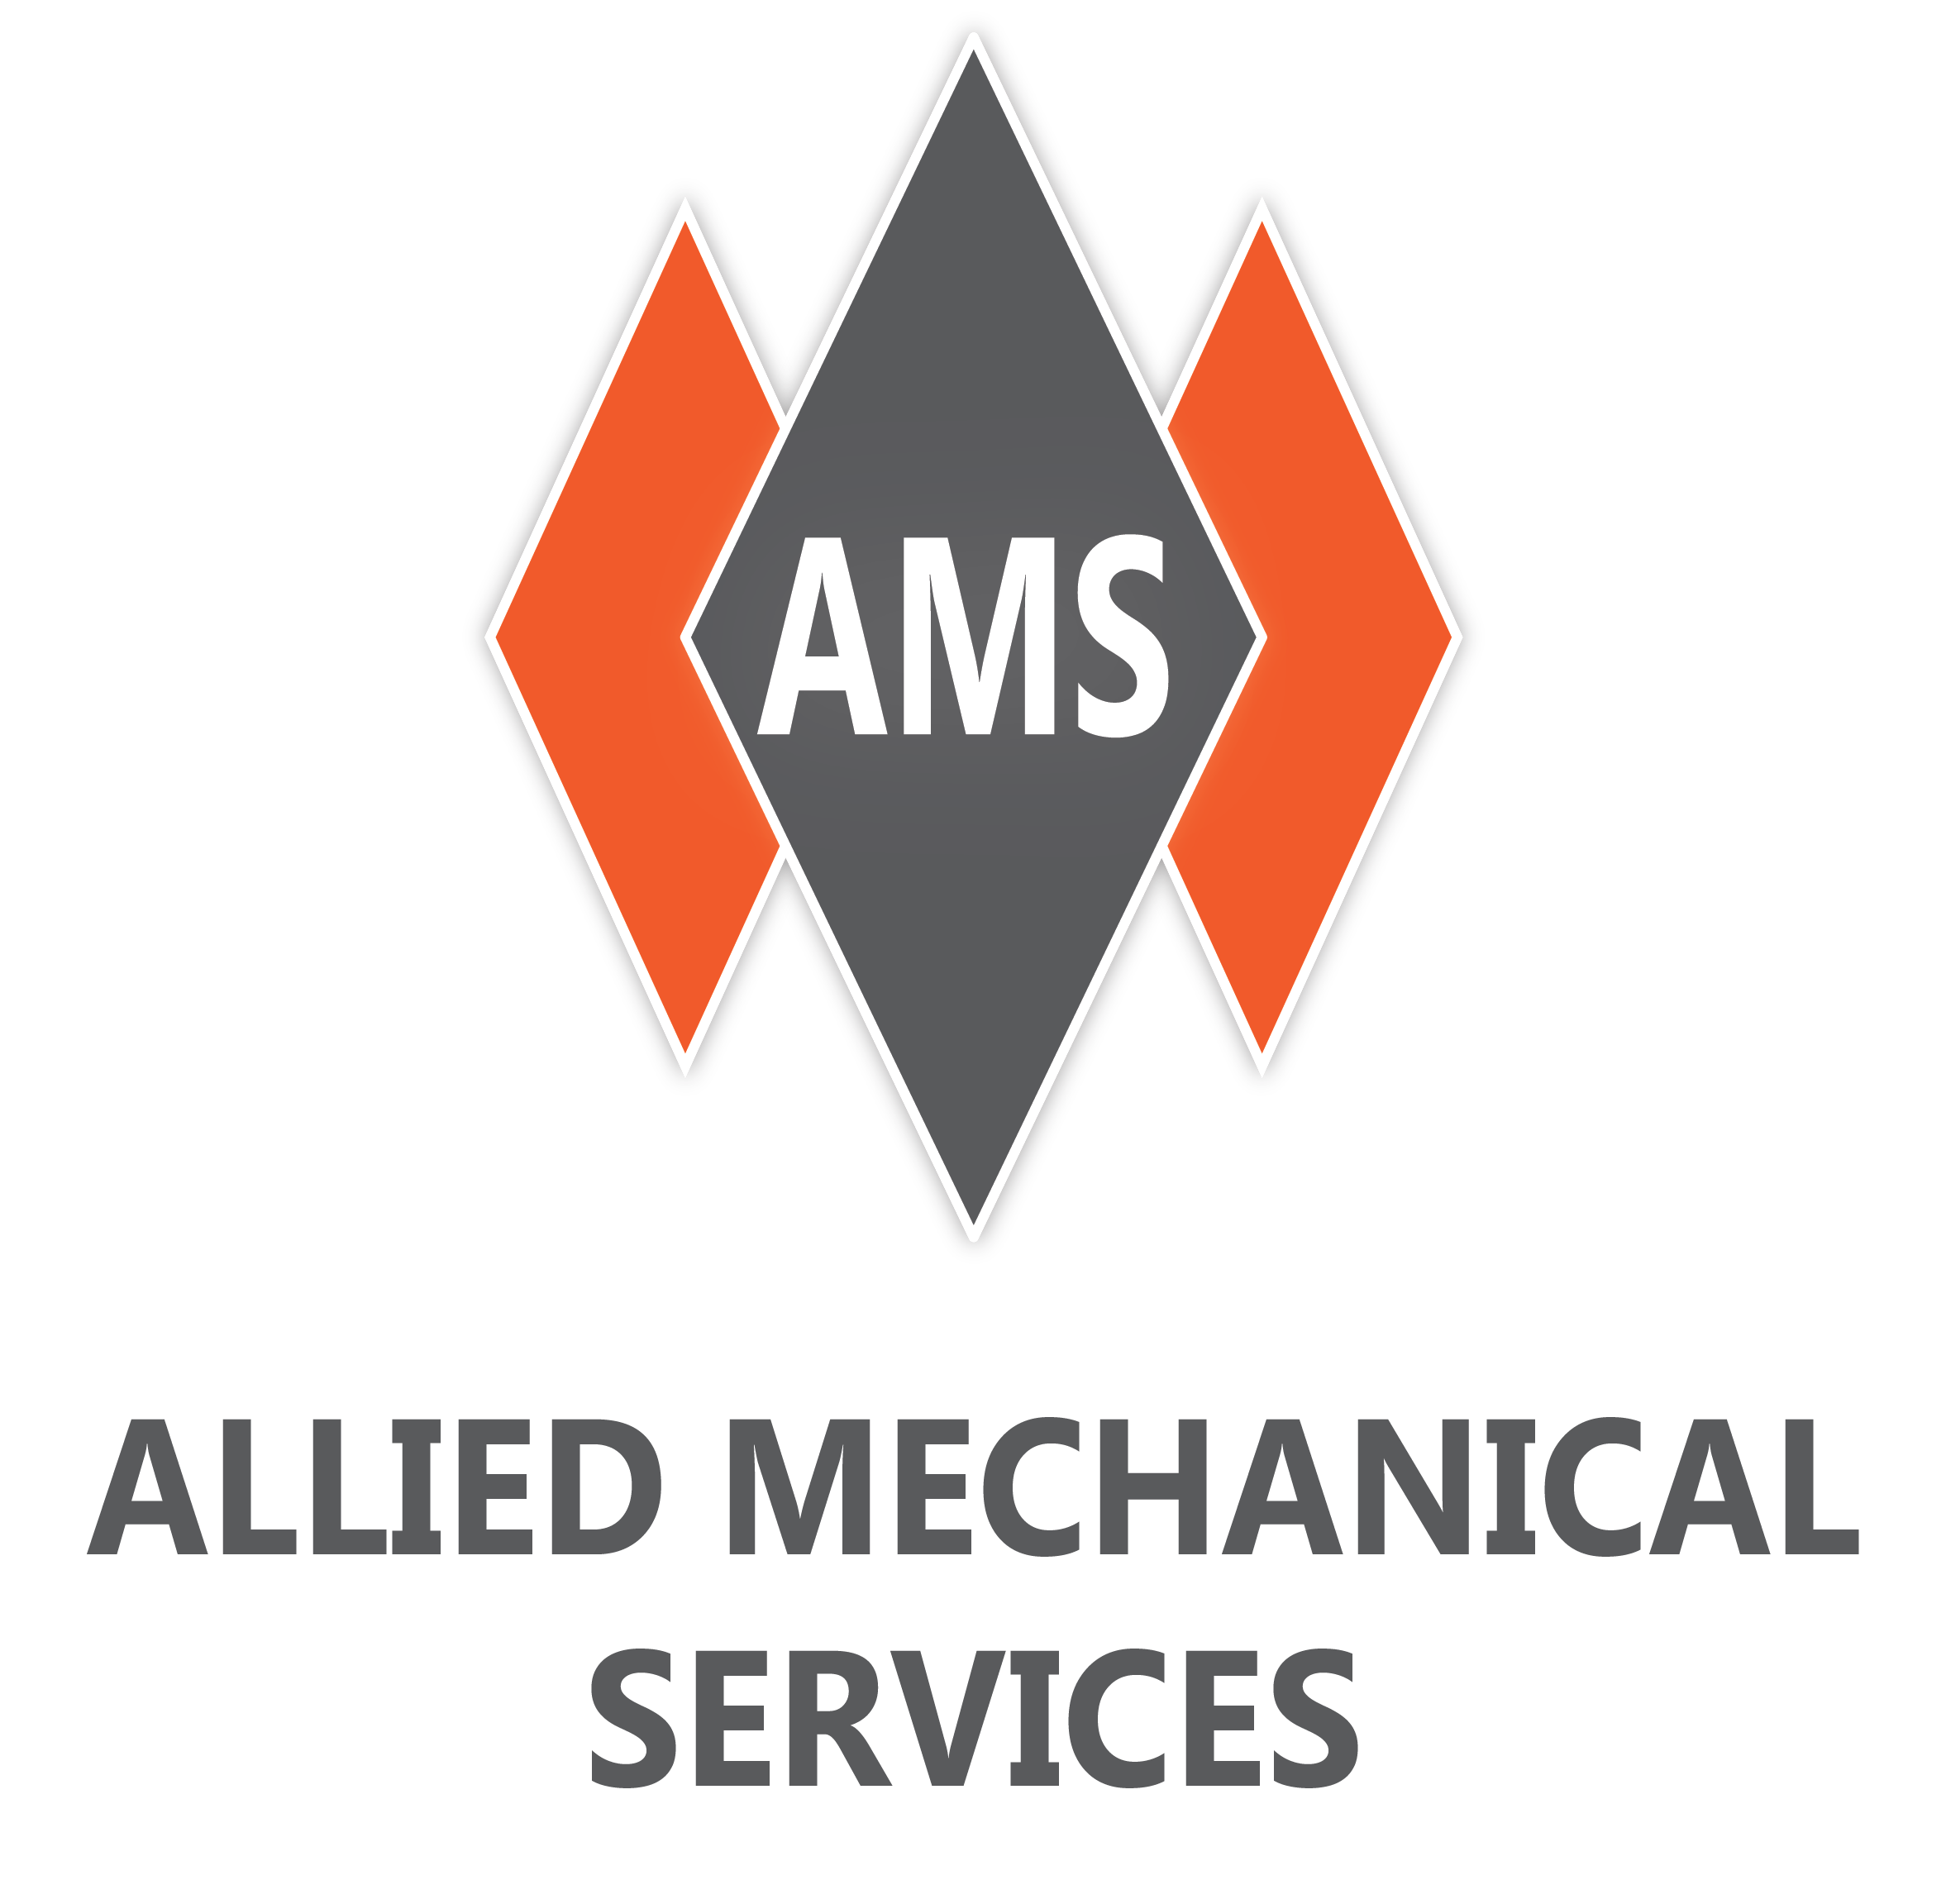 Allied Mechanical Services